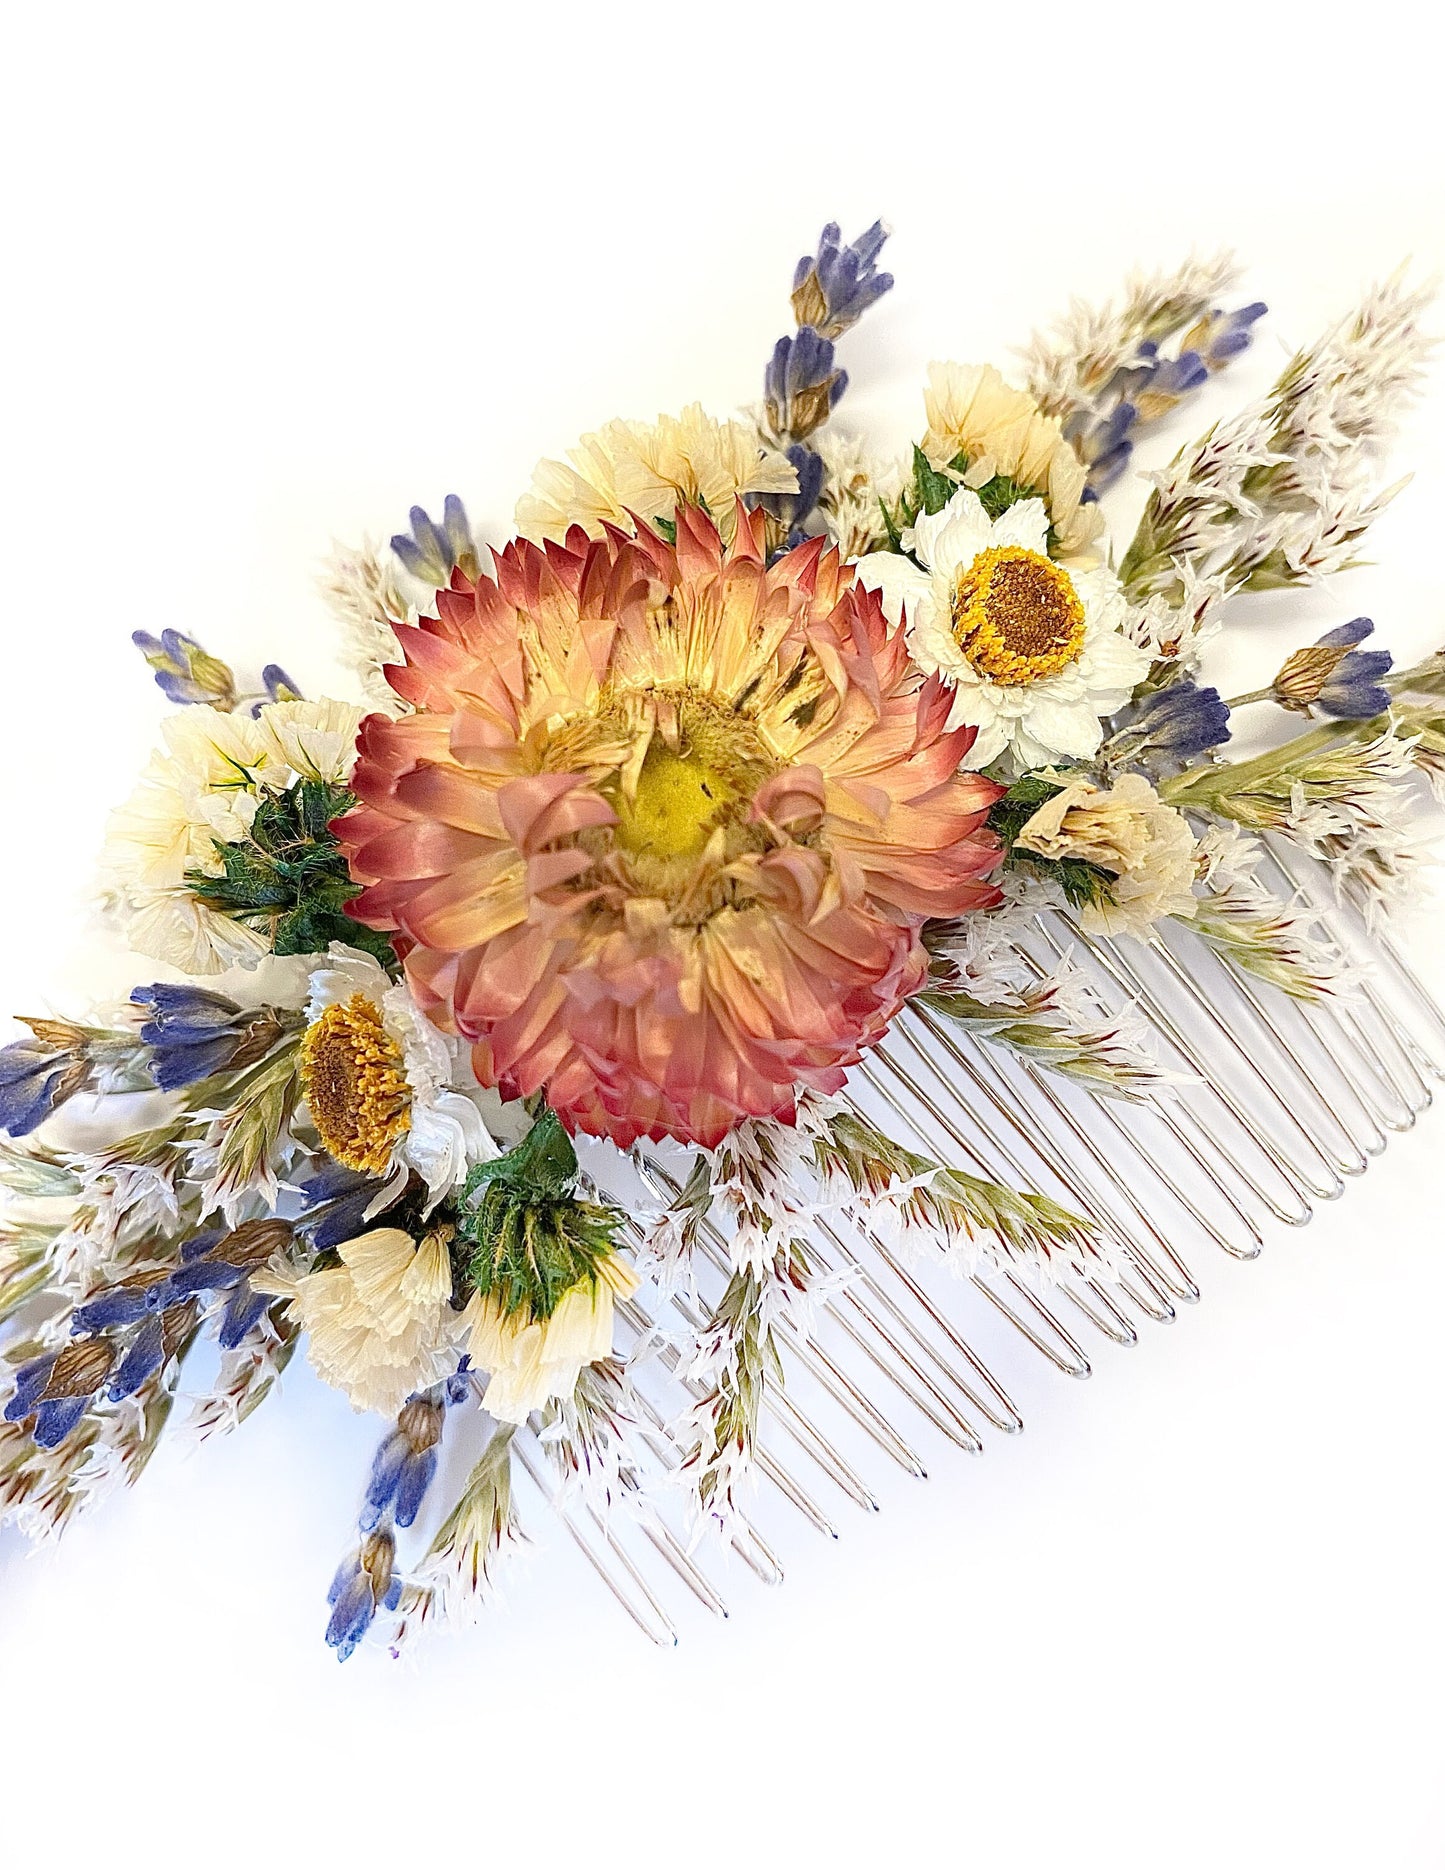 Hair Comb, Dried Flowers, Preserved Flowers, Floral Comb, Hair Clip, Hair Accessories, Wedding Accessory, Simple, Orange, Corsage, Prom